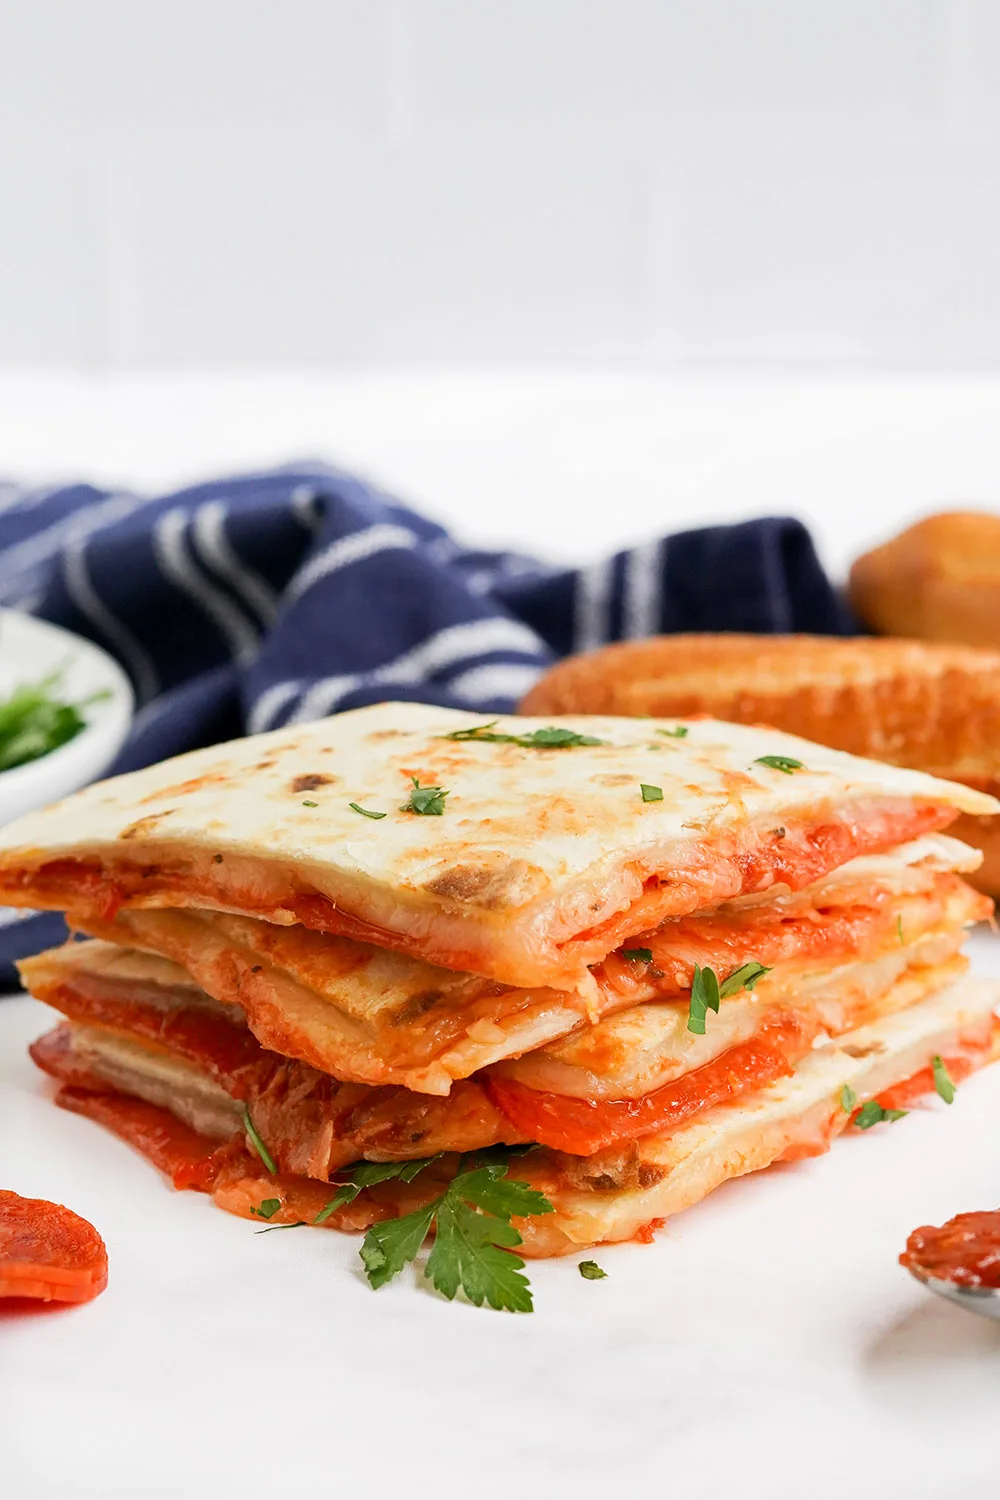 Stacked pizza quesadillas with parsley and a blue napkin.